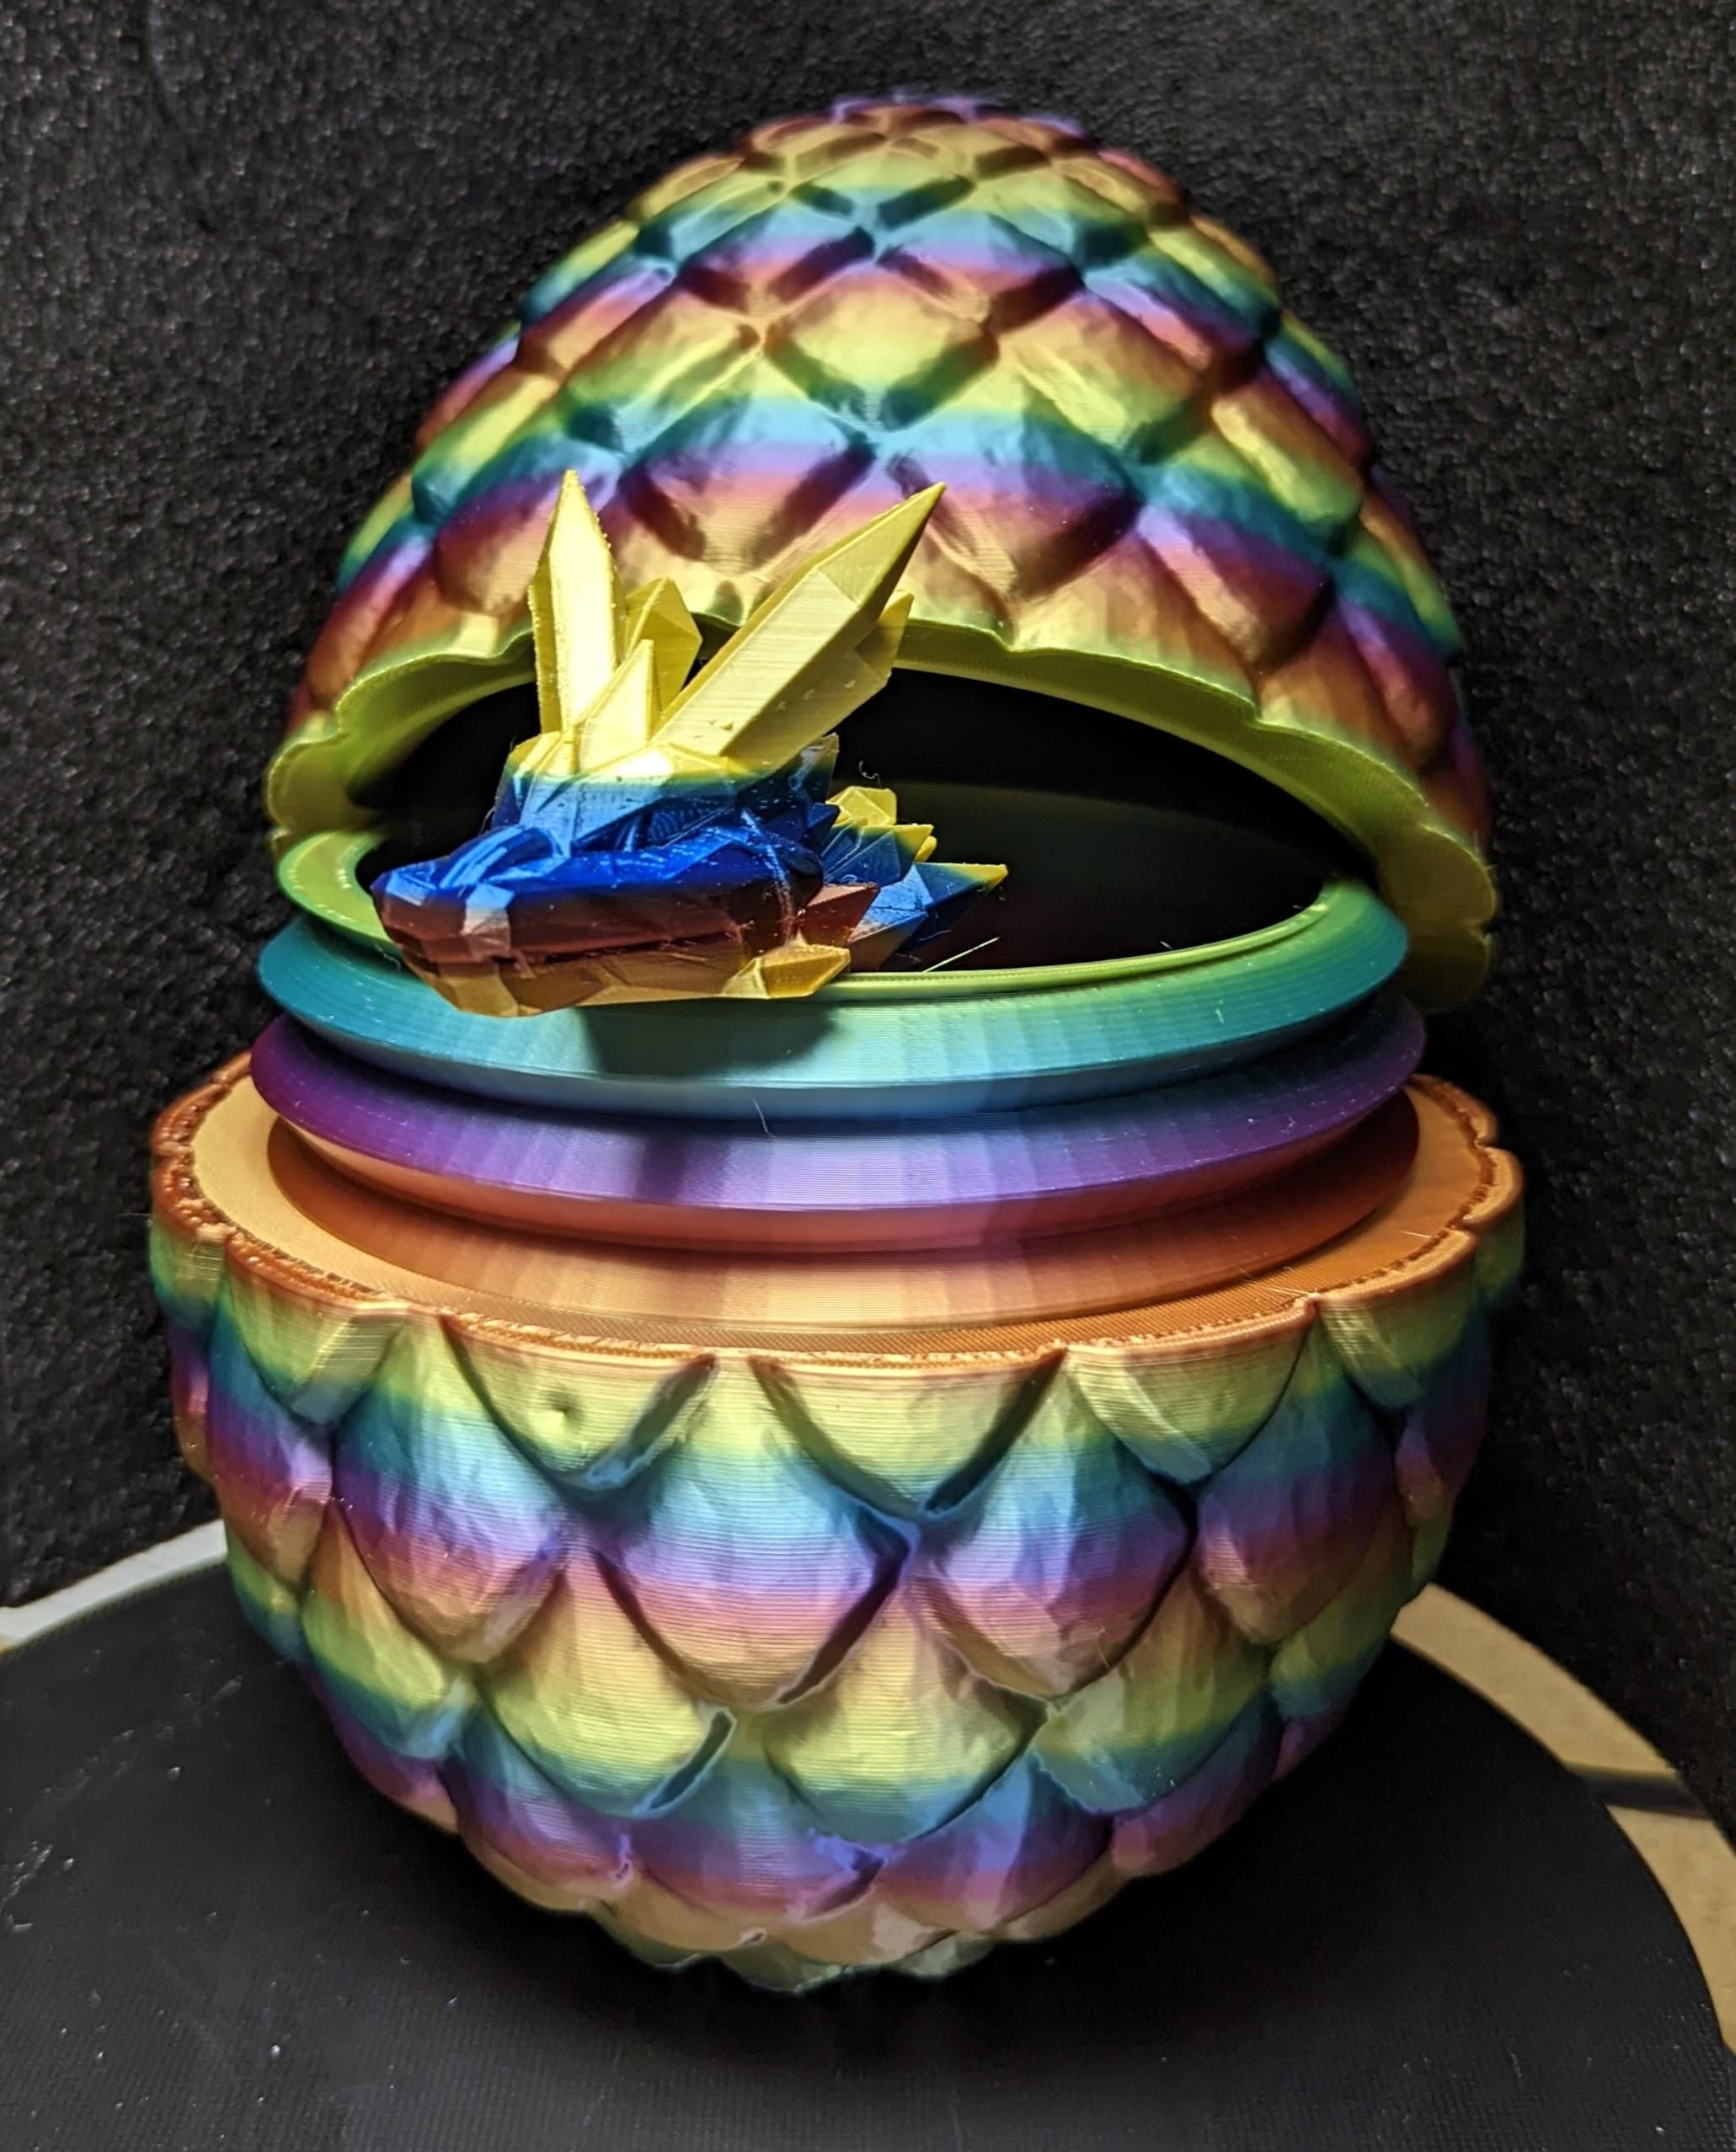 Threaded Dragon Egg, Great for Easter and Gifts - 400% - FLSun SuperRacer - TTYT3D Filament (https://amzn.to/3tUJeYd) - .2 layers - 25% infill. Turned out awesome, I didn't even print any - 3d model